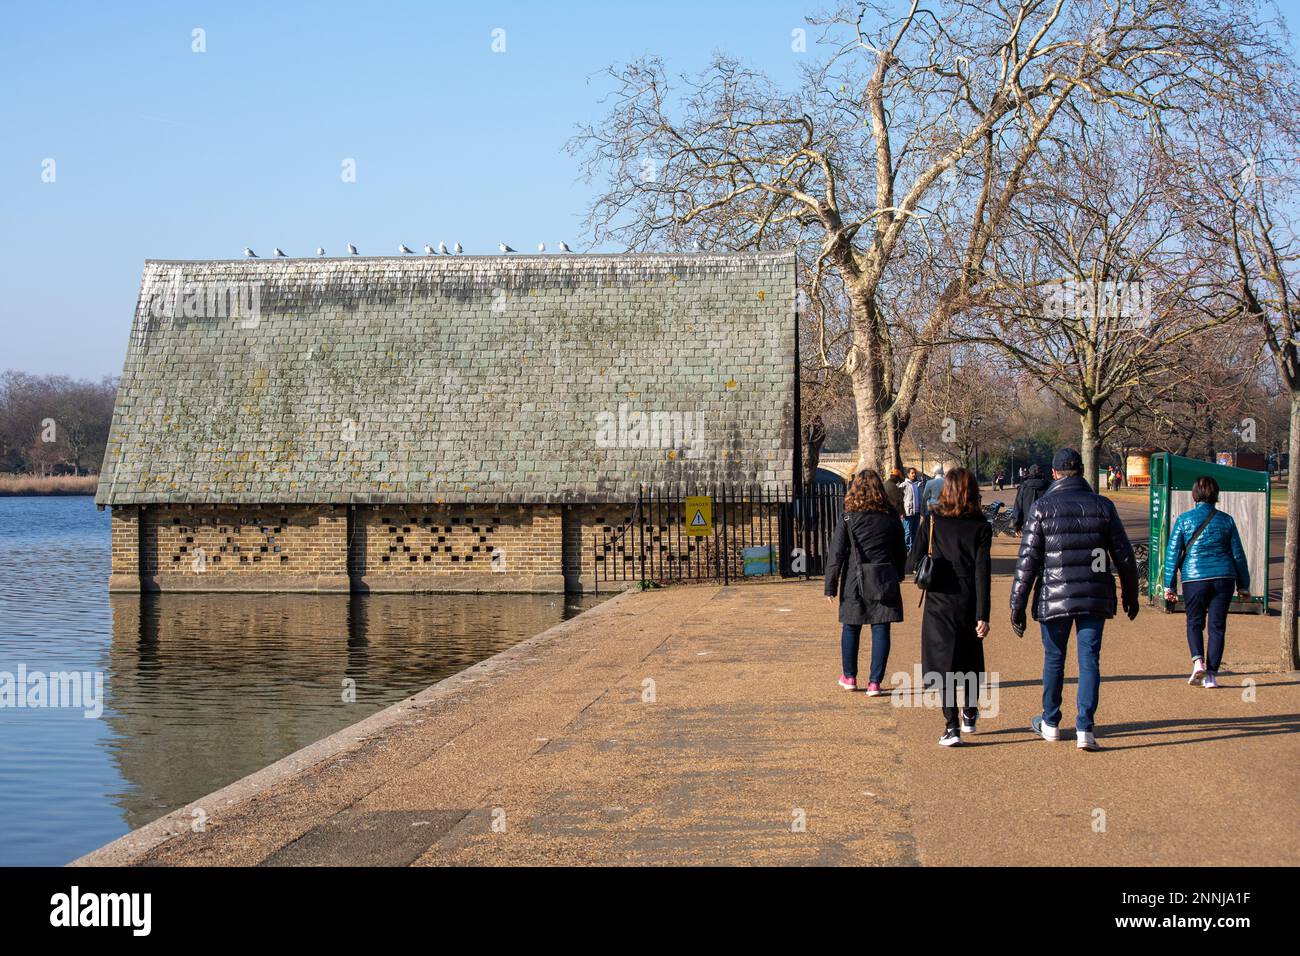 Strolling people and old boathouse by The Serpentine recreational lake on a sunny winter day in Hyde Park, London, England Stock Photo